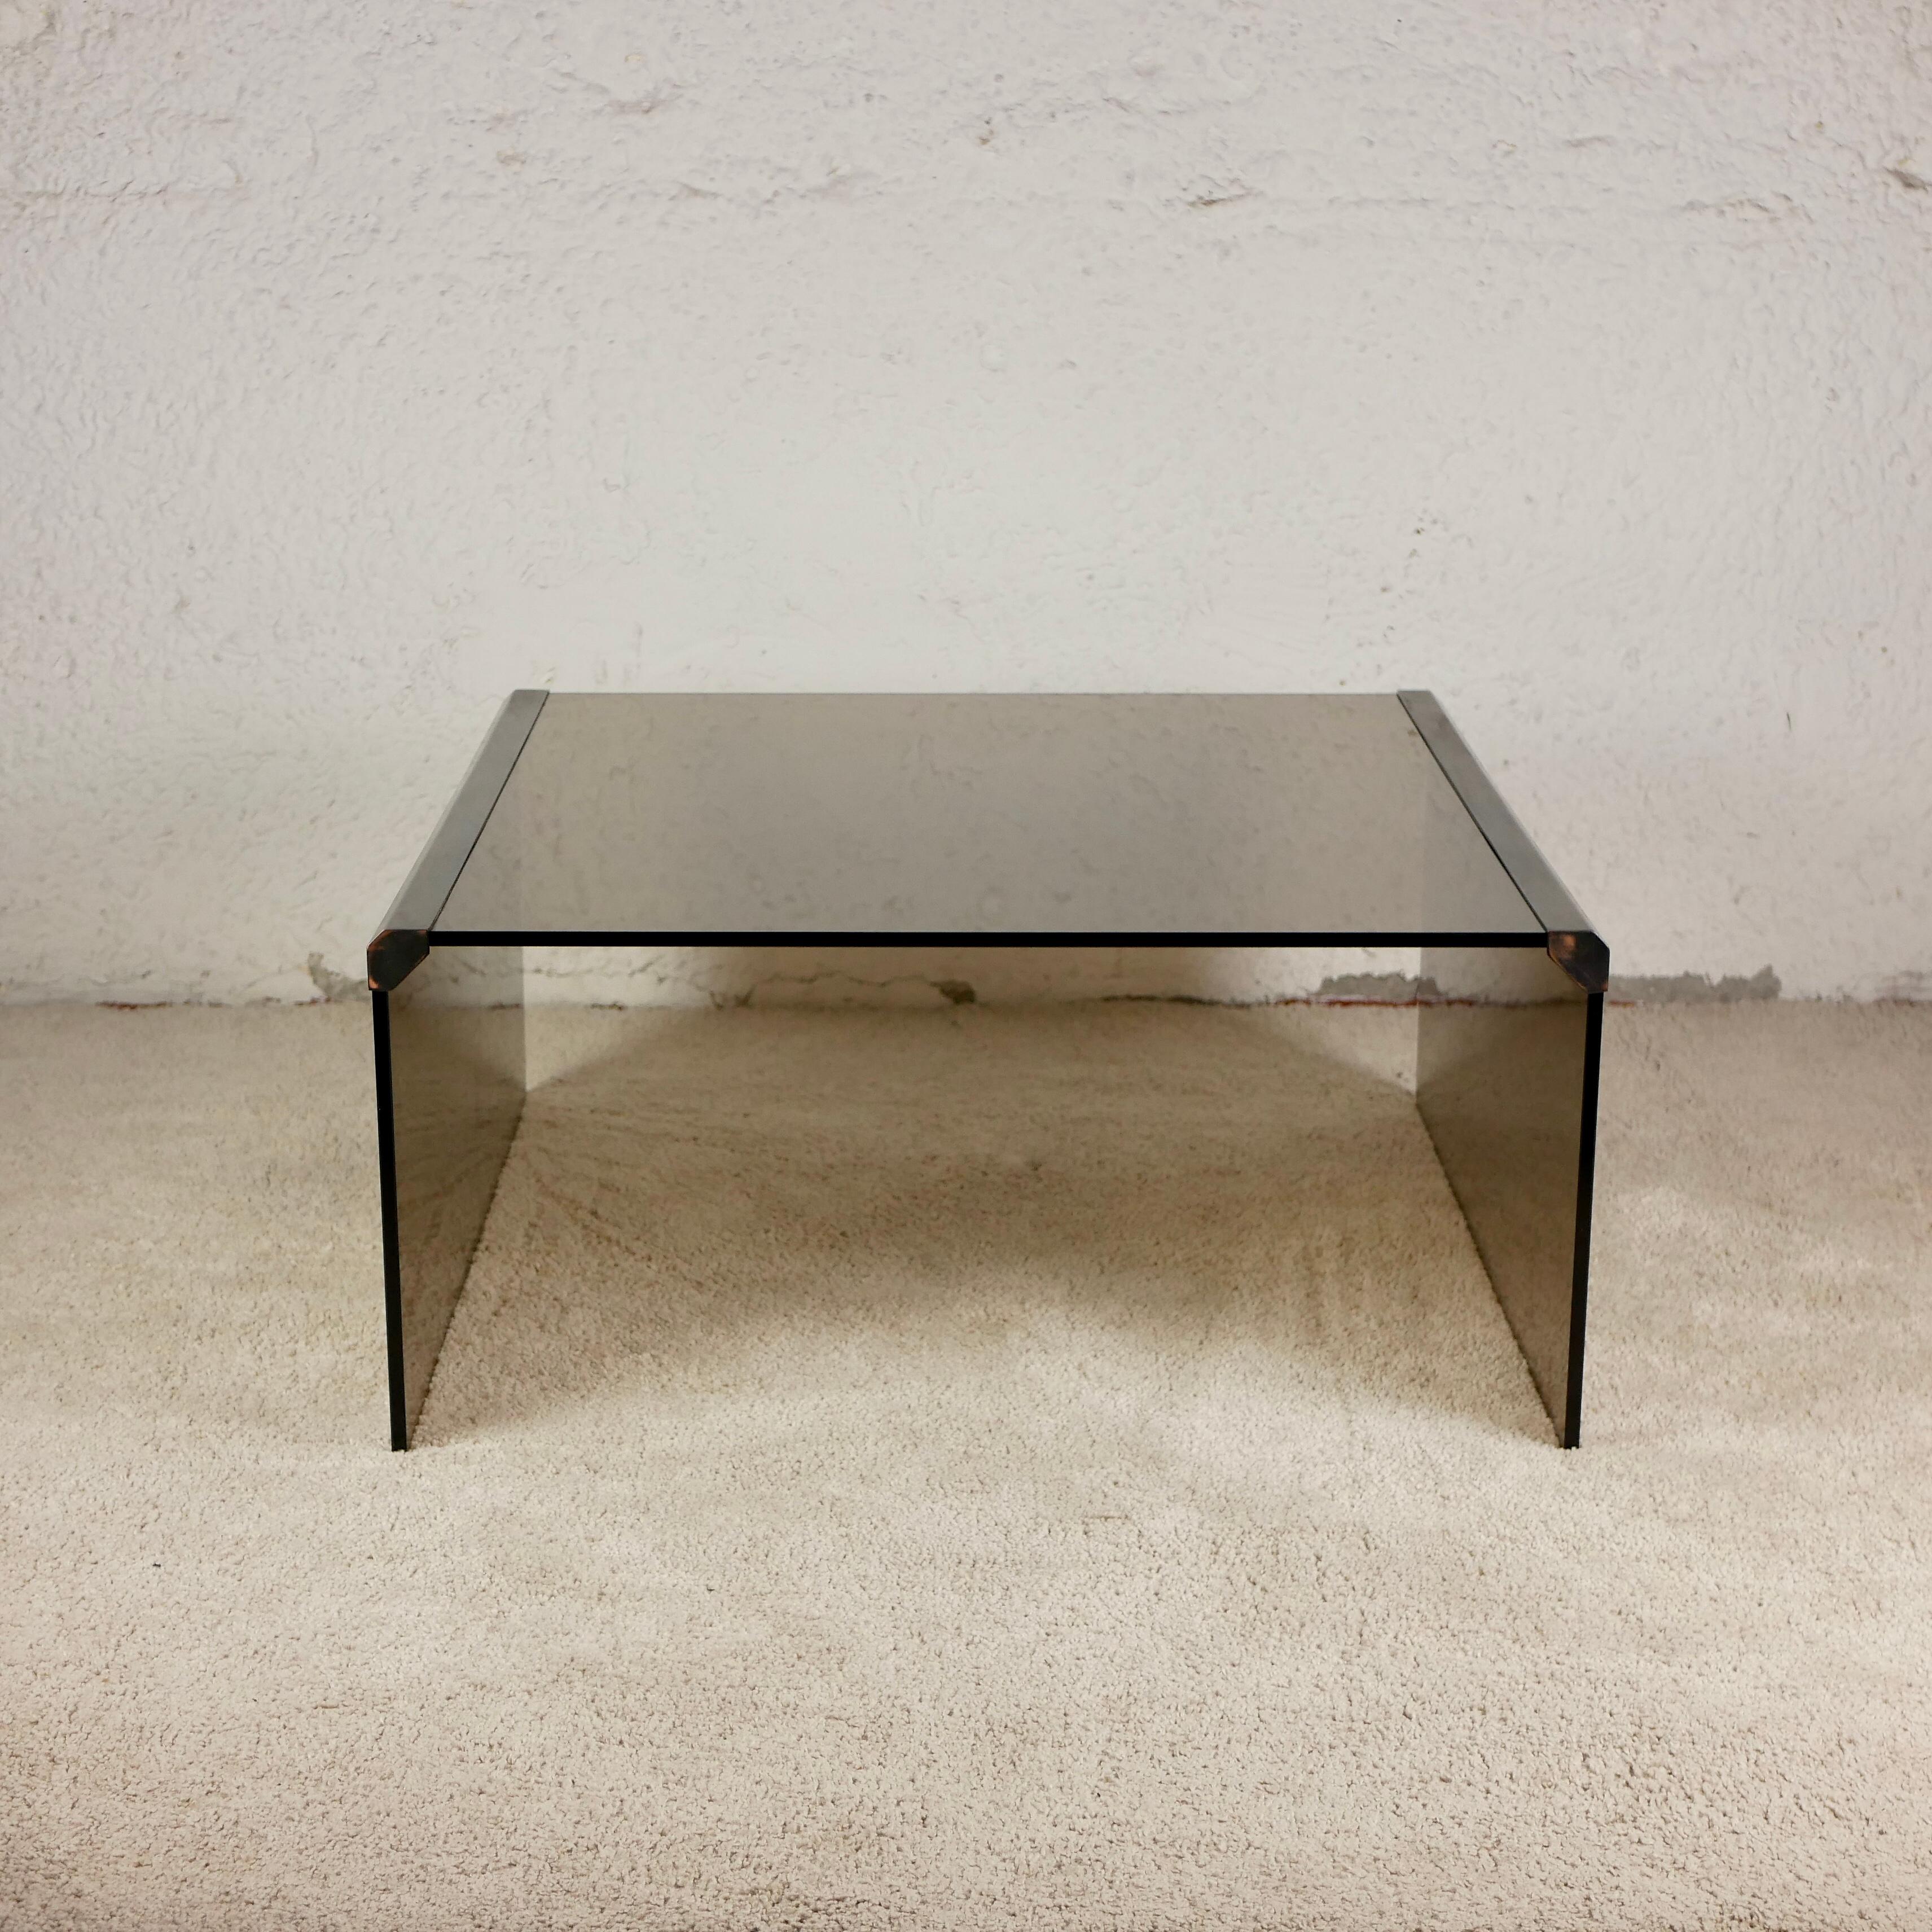 Less is more with this gorgeous large table designed by Pierangelo Gallotti for Gallotti & Radice made in Italy in the 1970s.
Smoked glass and patinated metal.
Very elegant.
Some scratches on the top.
We also have trois nesting tables matching